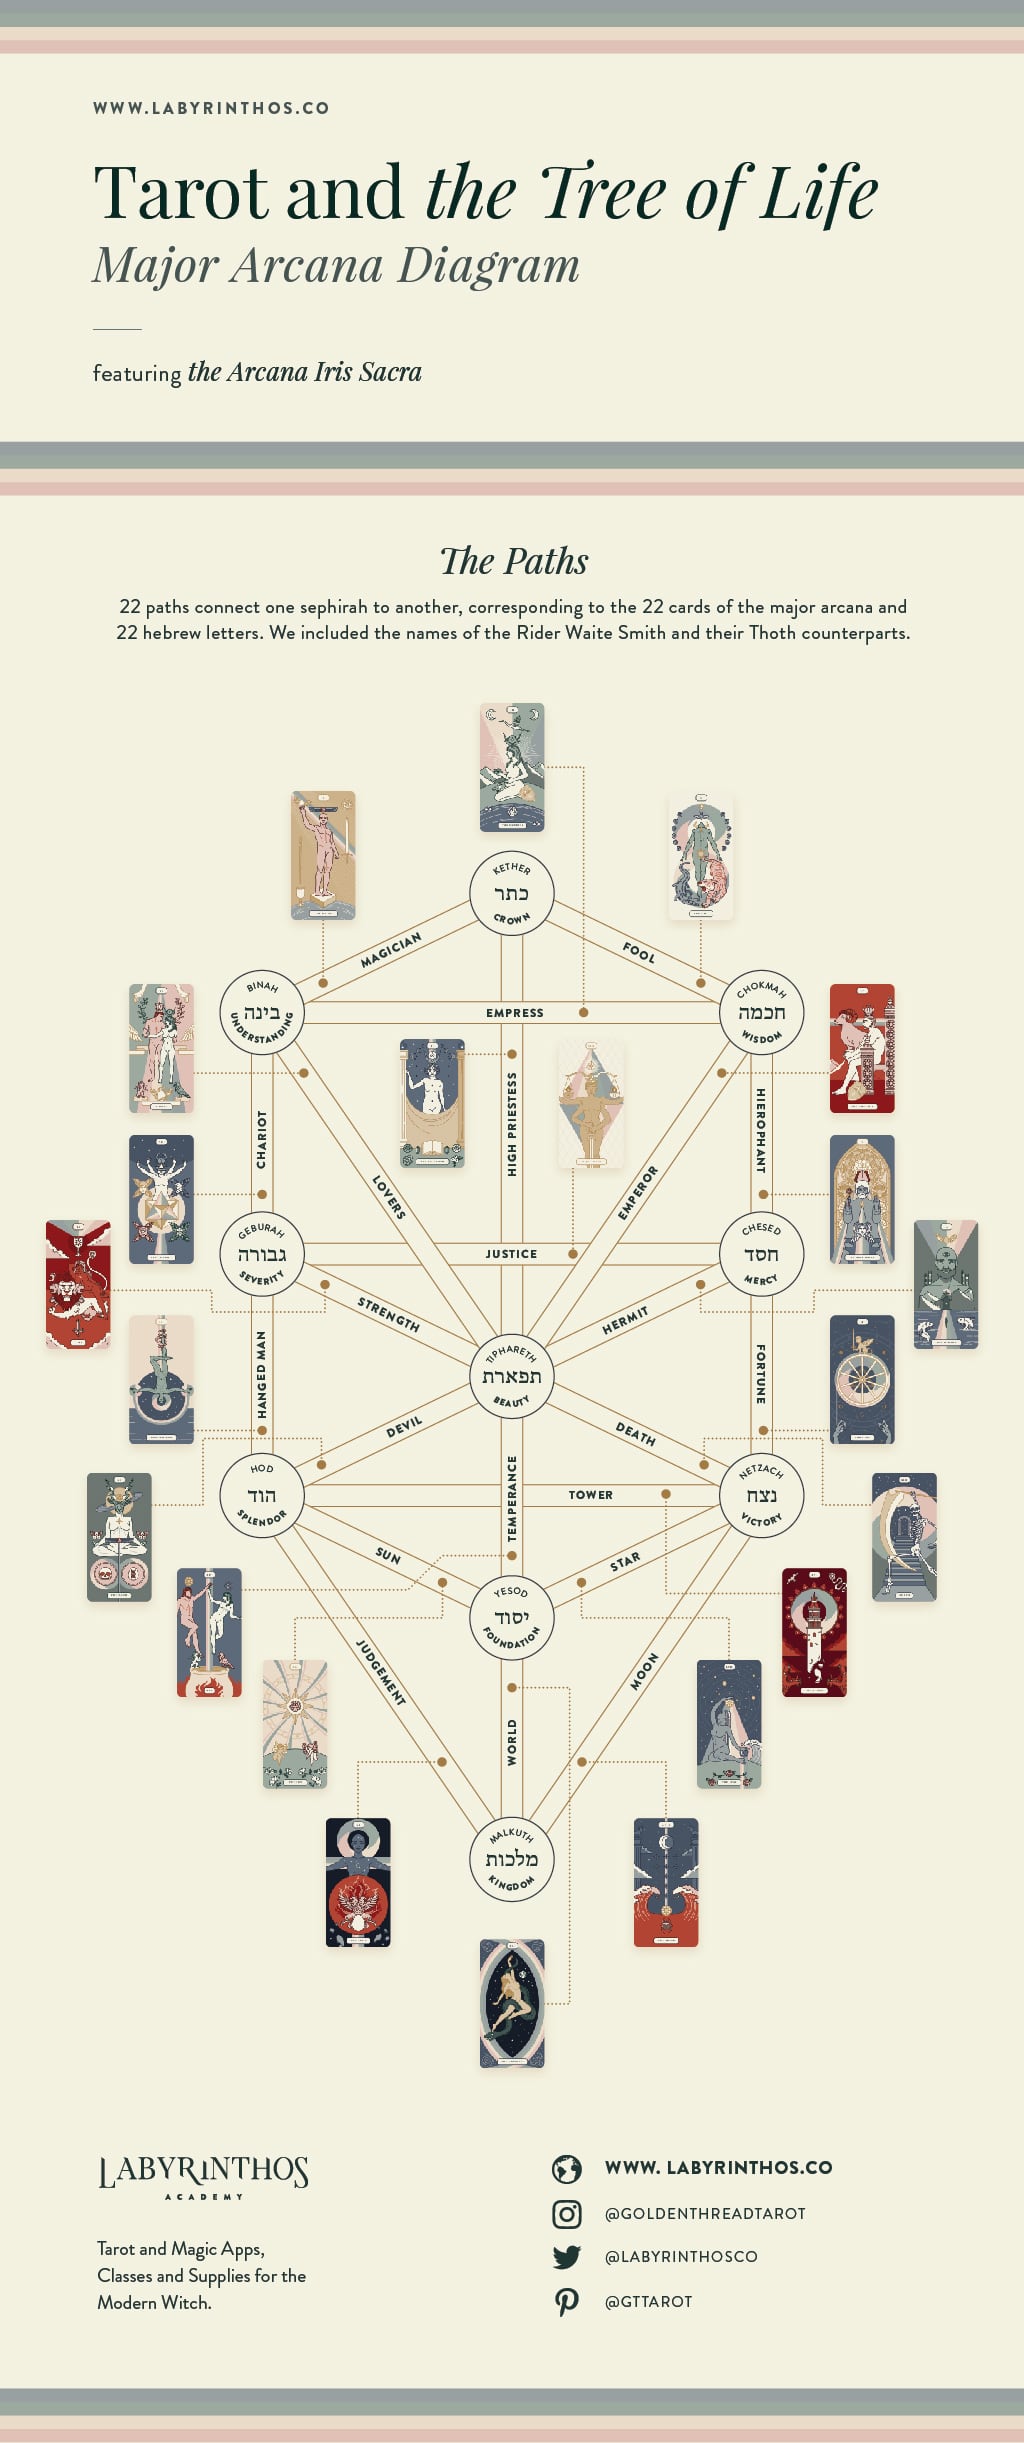 The Tree of Life and Tarot: The Major Arcana and Tree of Life Paths Diagram